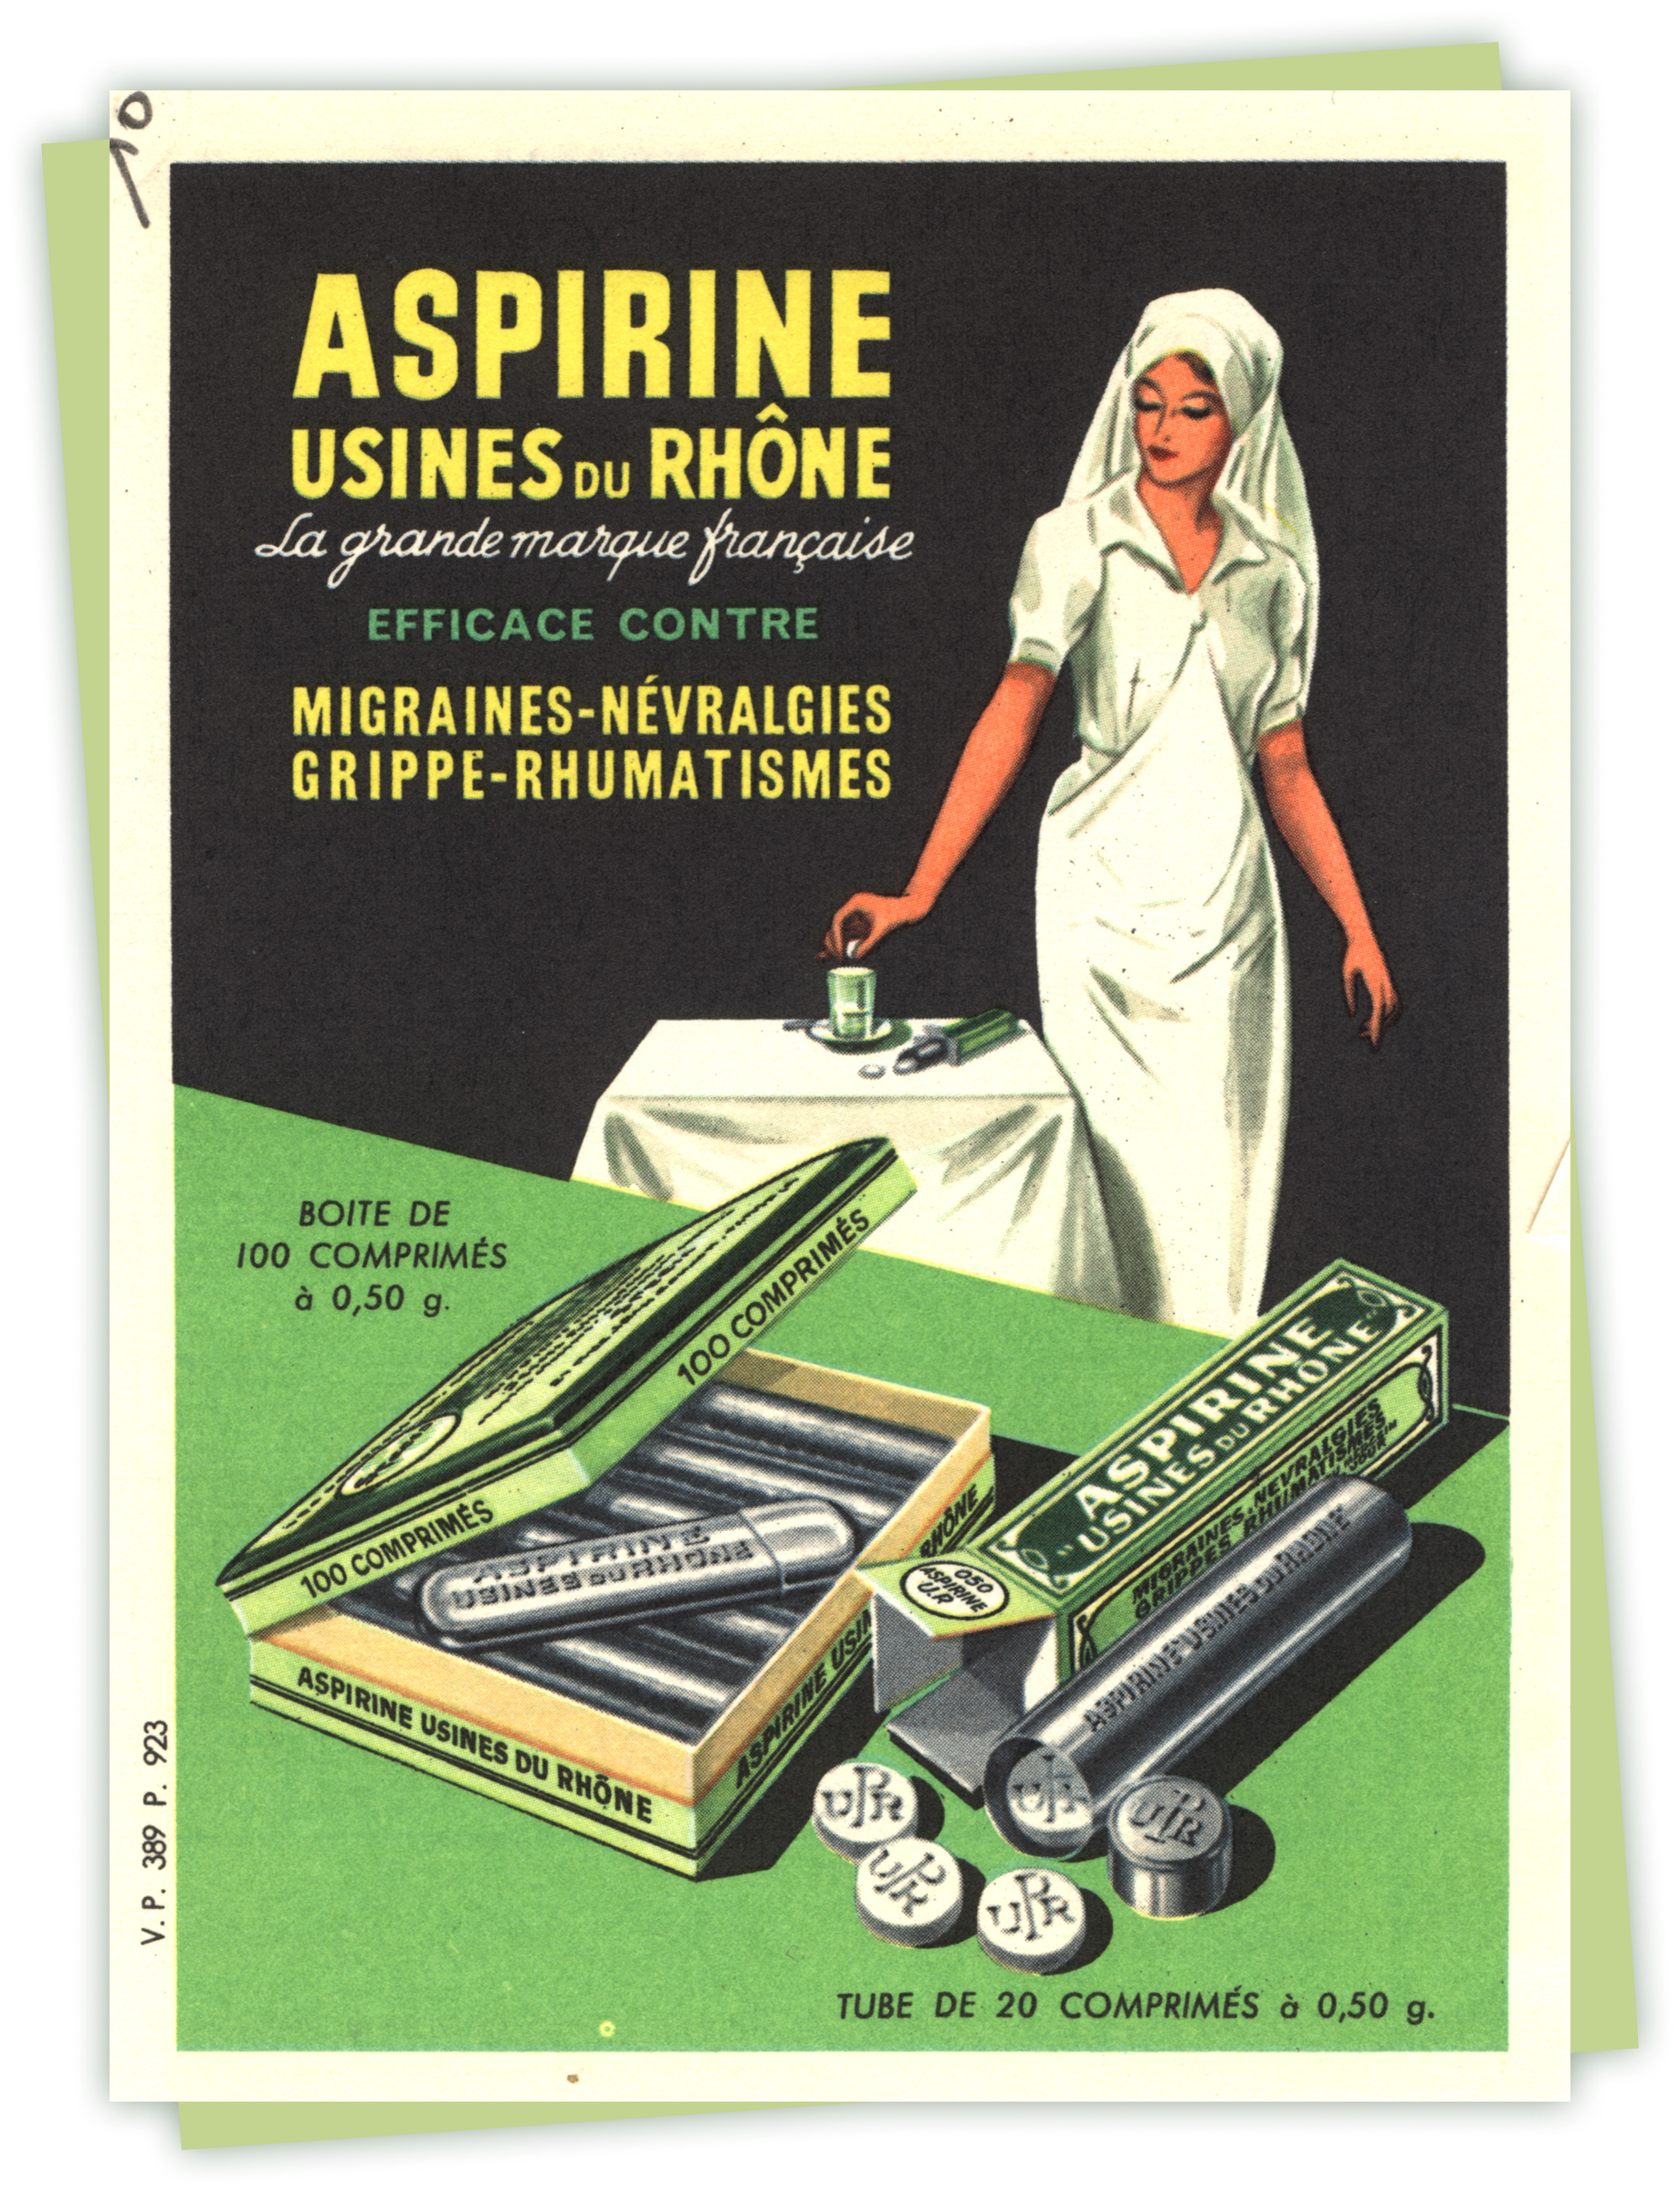 An ad that is a color illustration of a white woman nurse near a package of aspirin